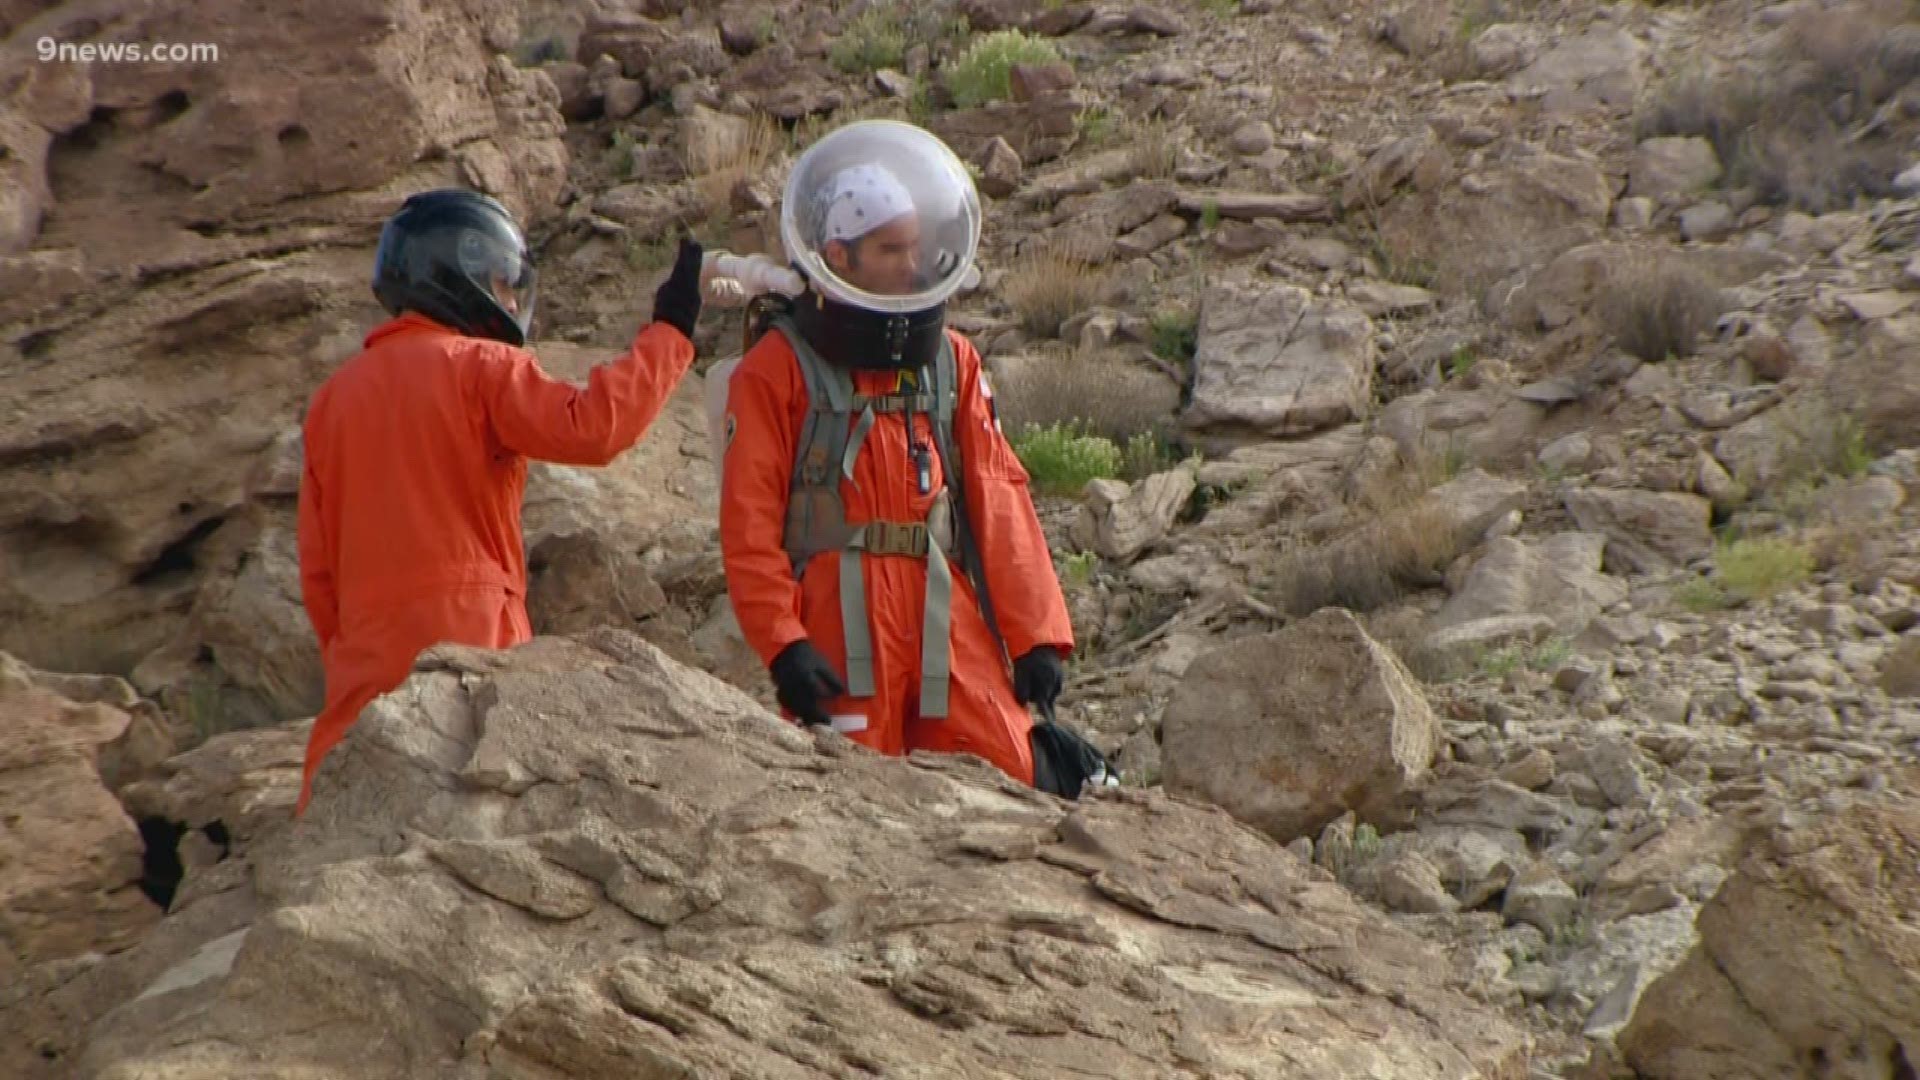 Students from CU-Boulder are learning to deal with medical emergencies at the Mars Desert Research Station in Hanksville, Utah. The program is meant to improve the care of people in space.